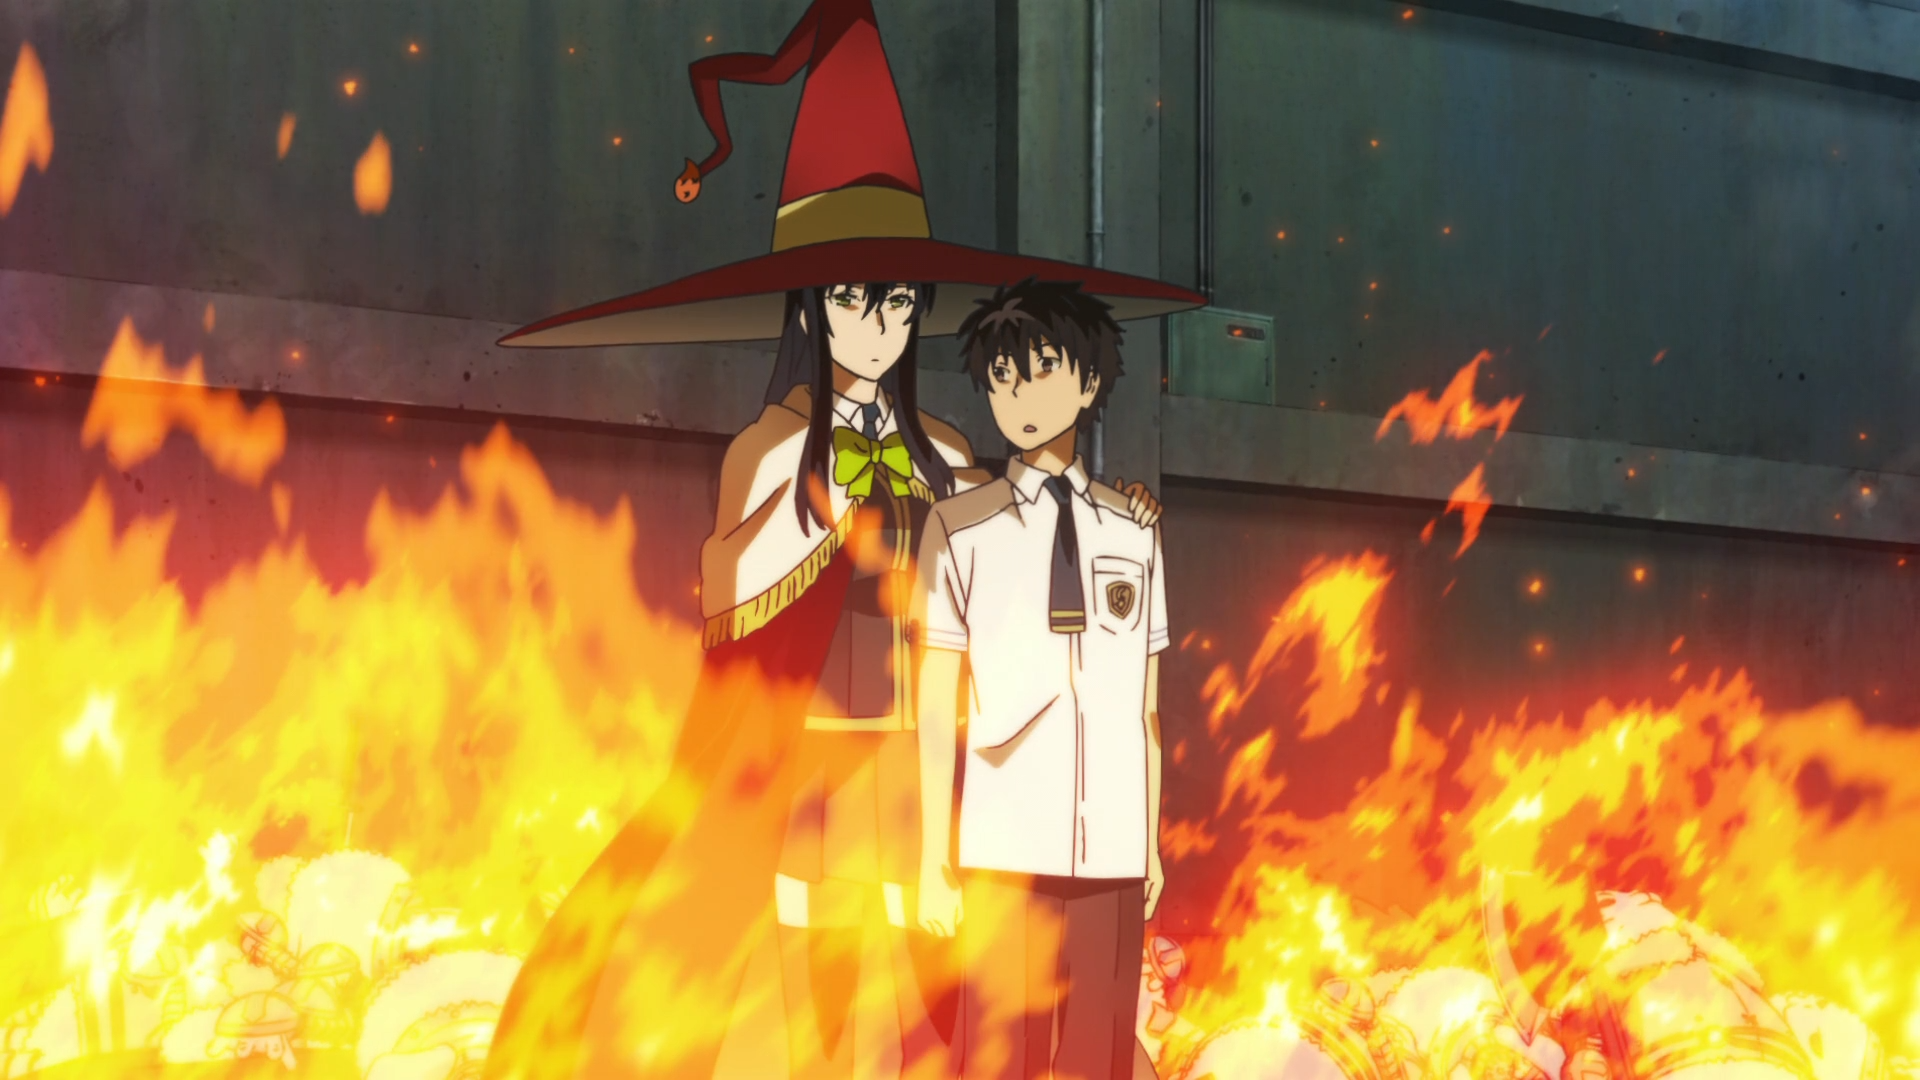 Ayaka Kagiri, the Witch of Flames, protects her charge, Honoka Takamiya, with a shield of fire in a scene from the Witch Craft Works TV anime.